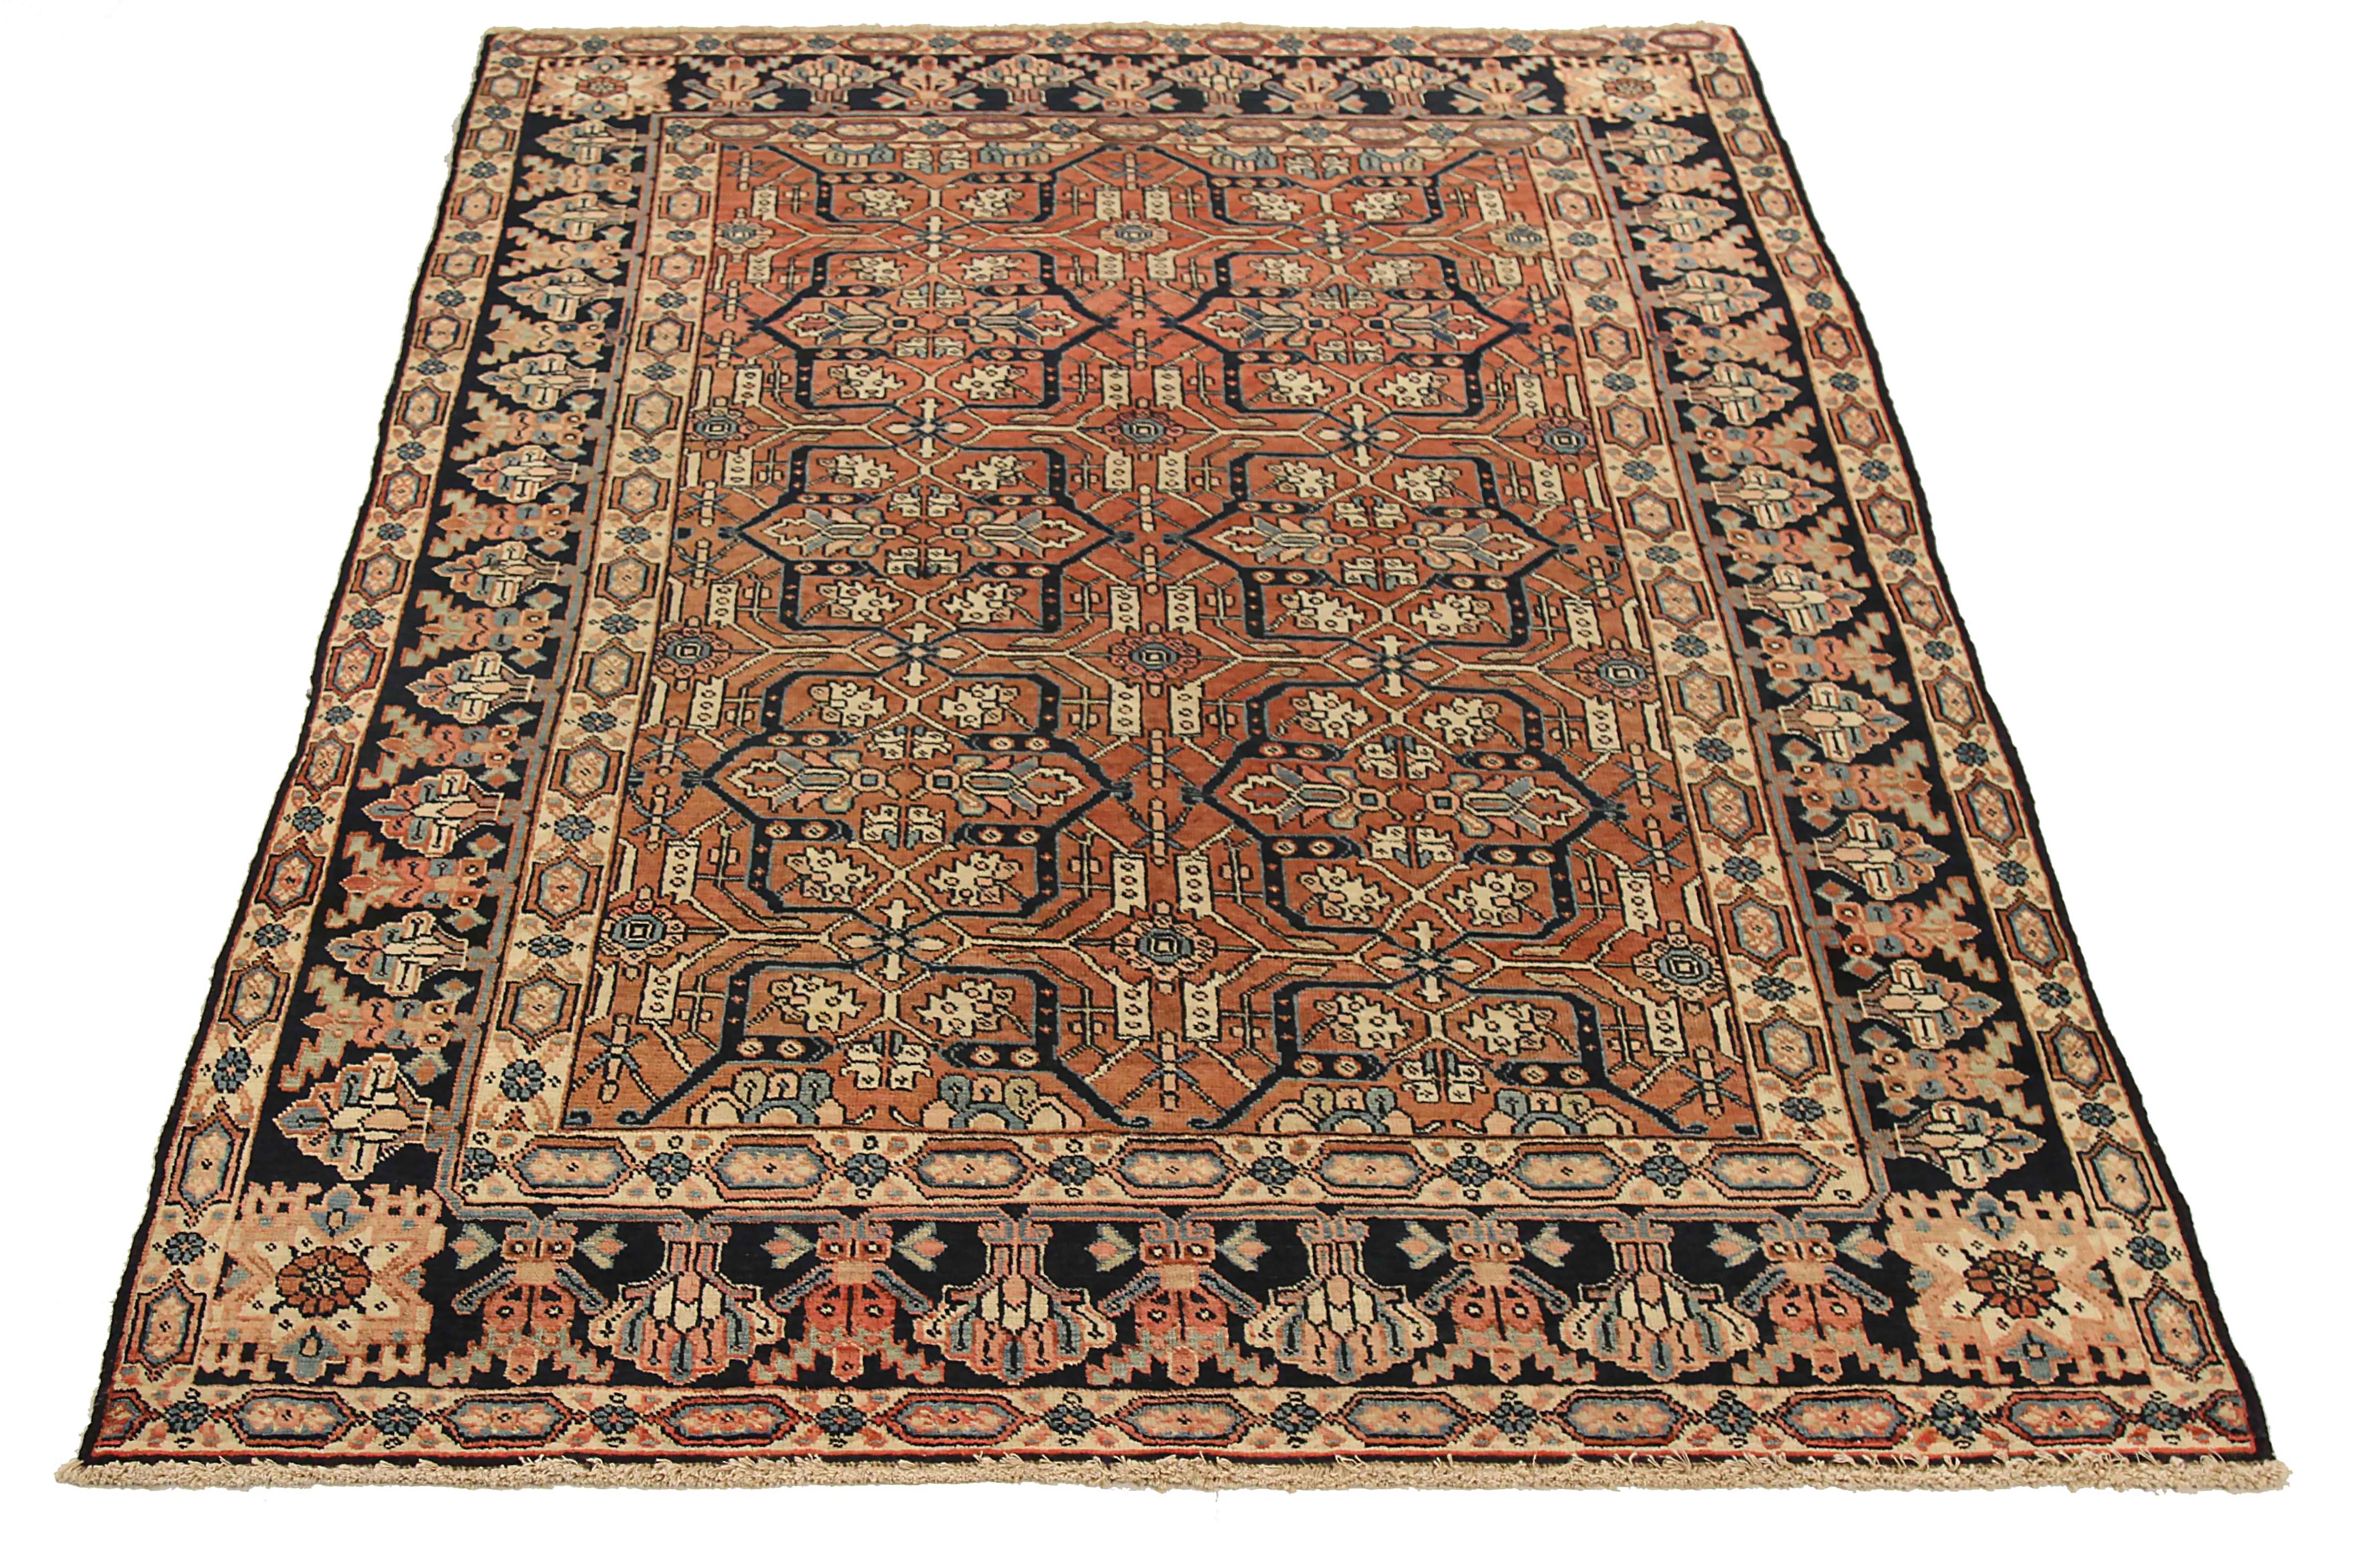 Antique Persian area rug handwoven from the finest sheep’s wool. It’s colored with all-natural vegetable dyes that are safe for humans and pets. It’s a traditional Heriz design handwoven by expert artisans.It’s a lovely area rug that can be